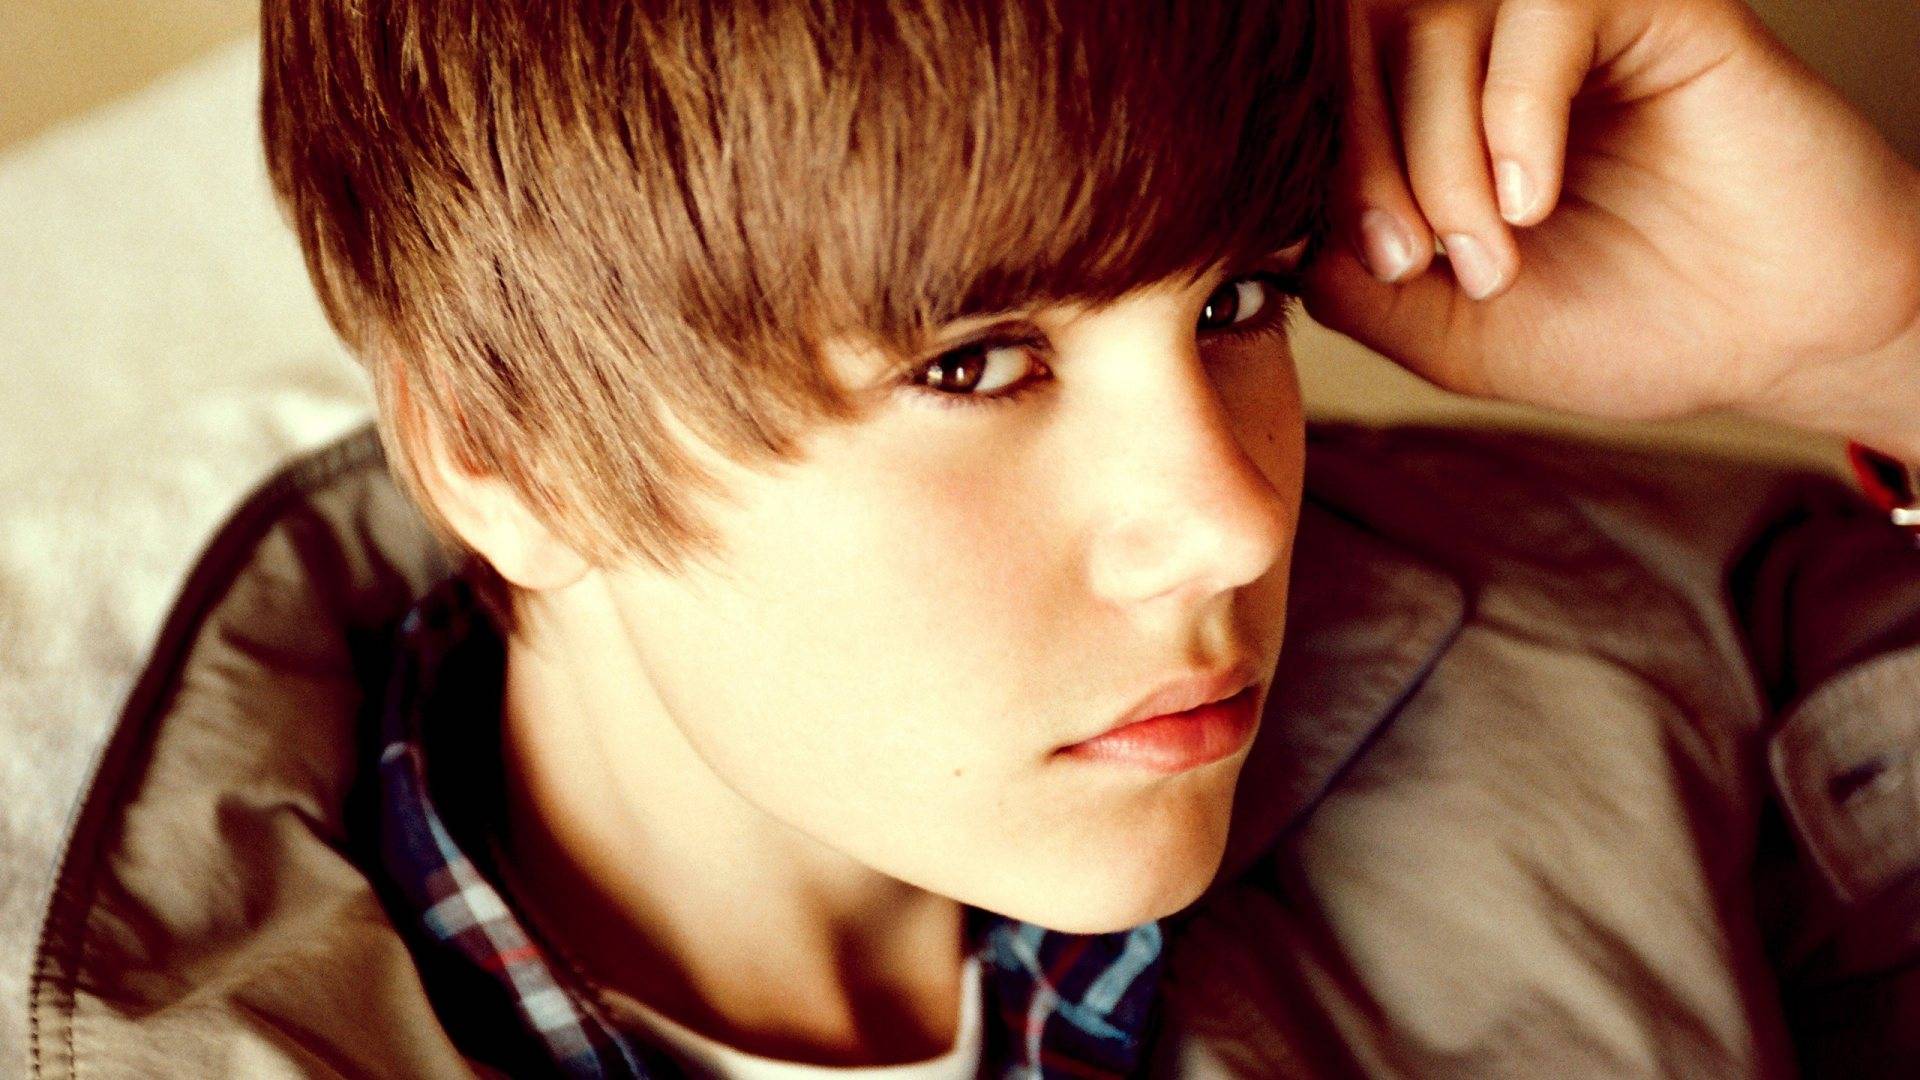 Lovely Justin Bieber Wallpapers Full HD Pictures